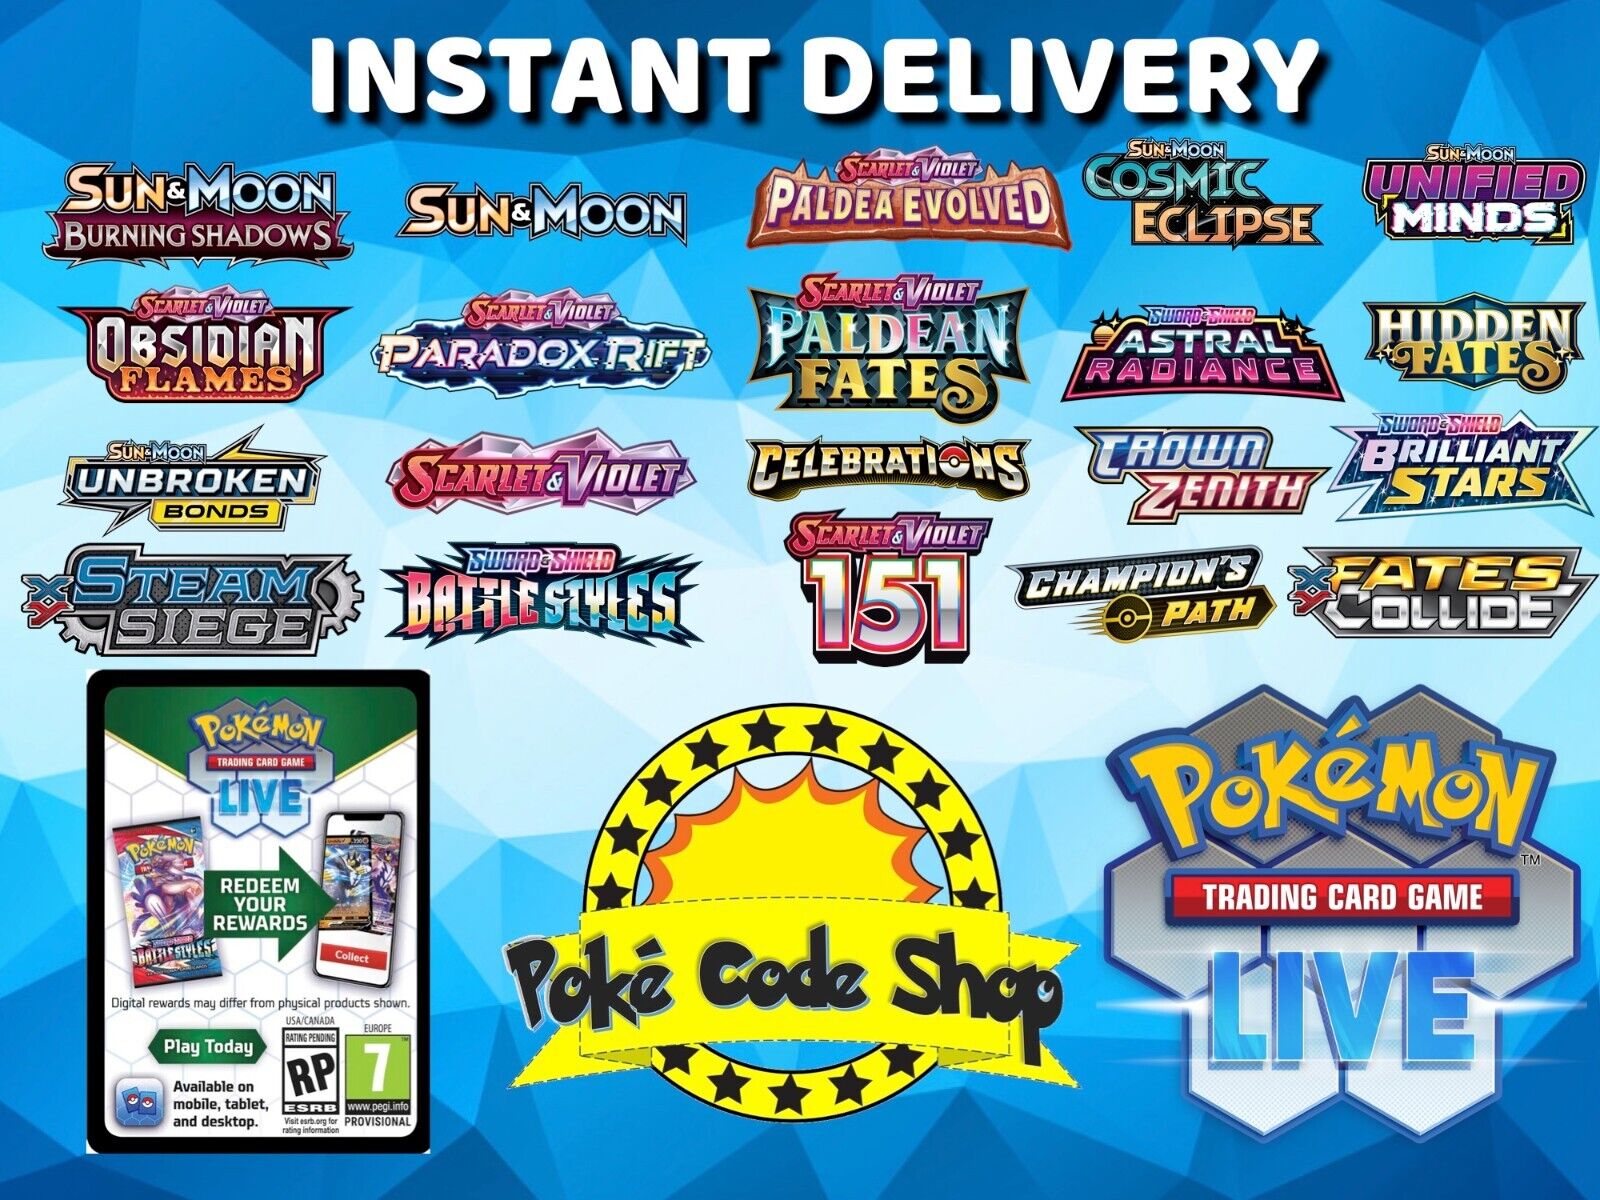 50 x BOOSTER CODE MIX Live Pokemon Codes Online INSTANT QR EMAIL DELIVERY